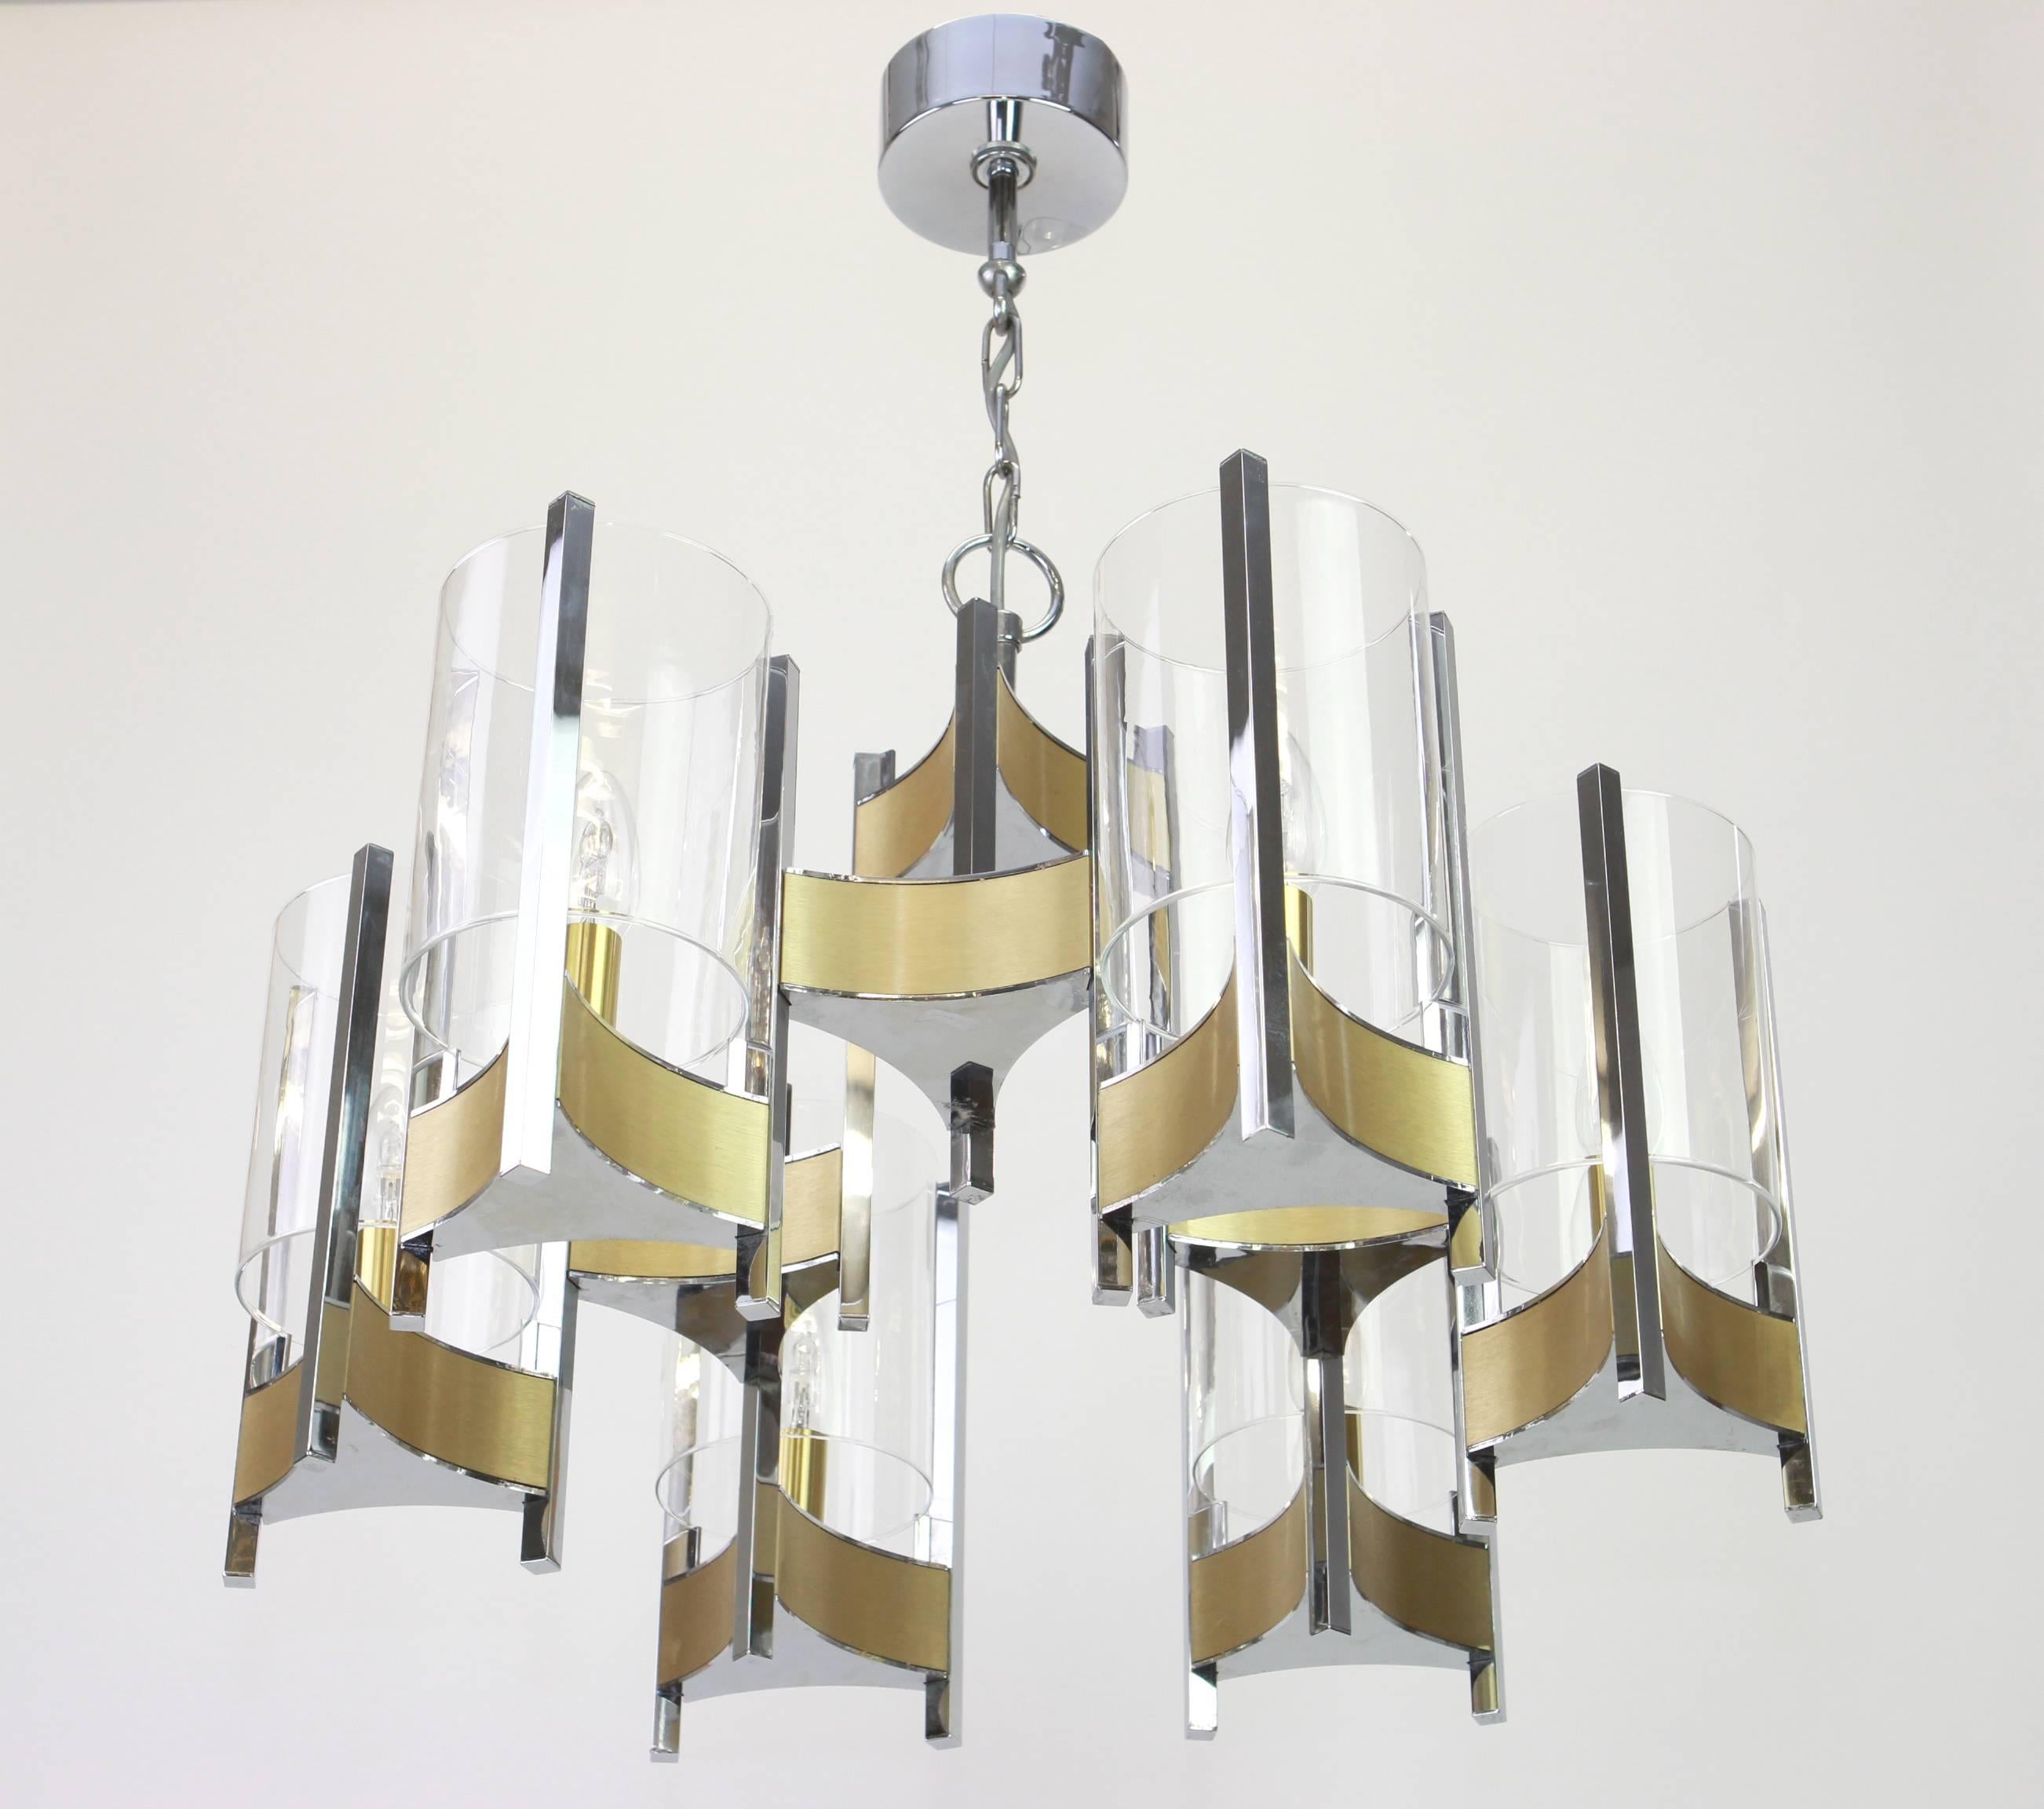 Six-light brass chandelier designed by Sciolari.
Brush brass, chrome, and round glass shades.
Made with brass, best of the 1960s.
High quality and in very good condition. Cleaned, well-wired and ready to use. 

The fixture requires 6 x E14 Standard